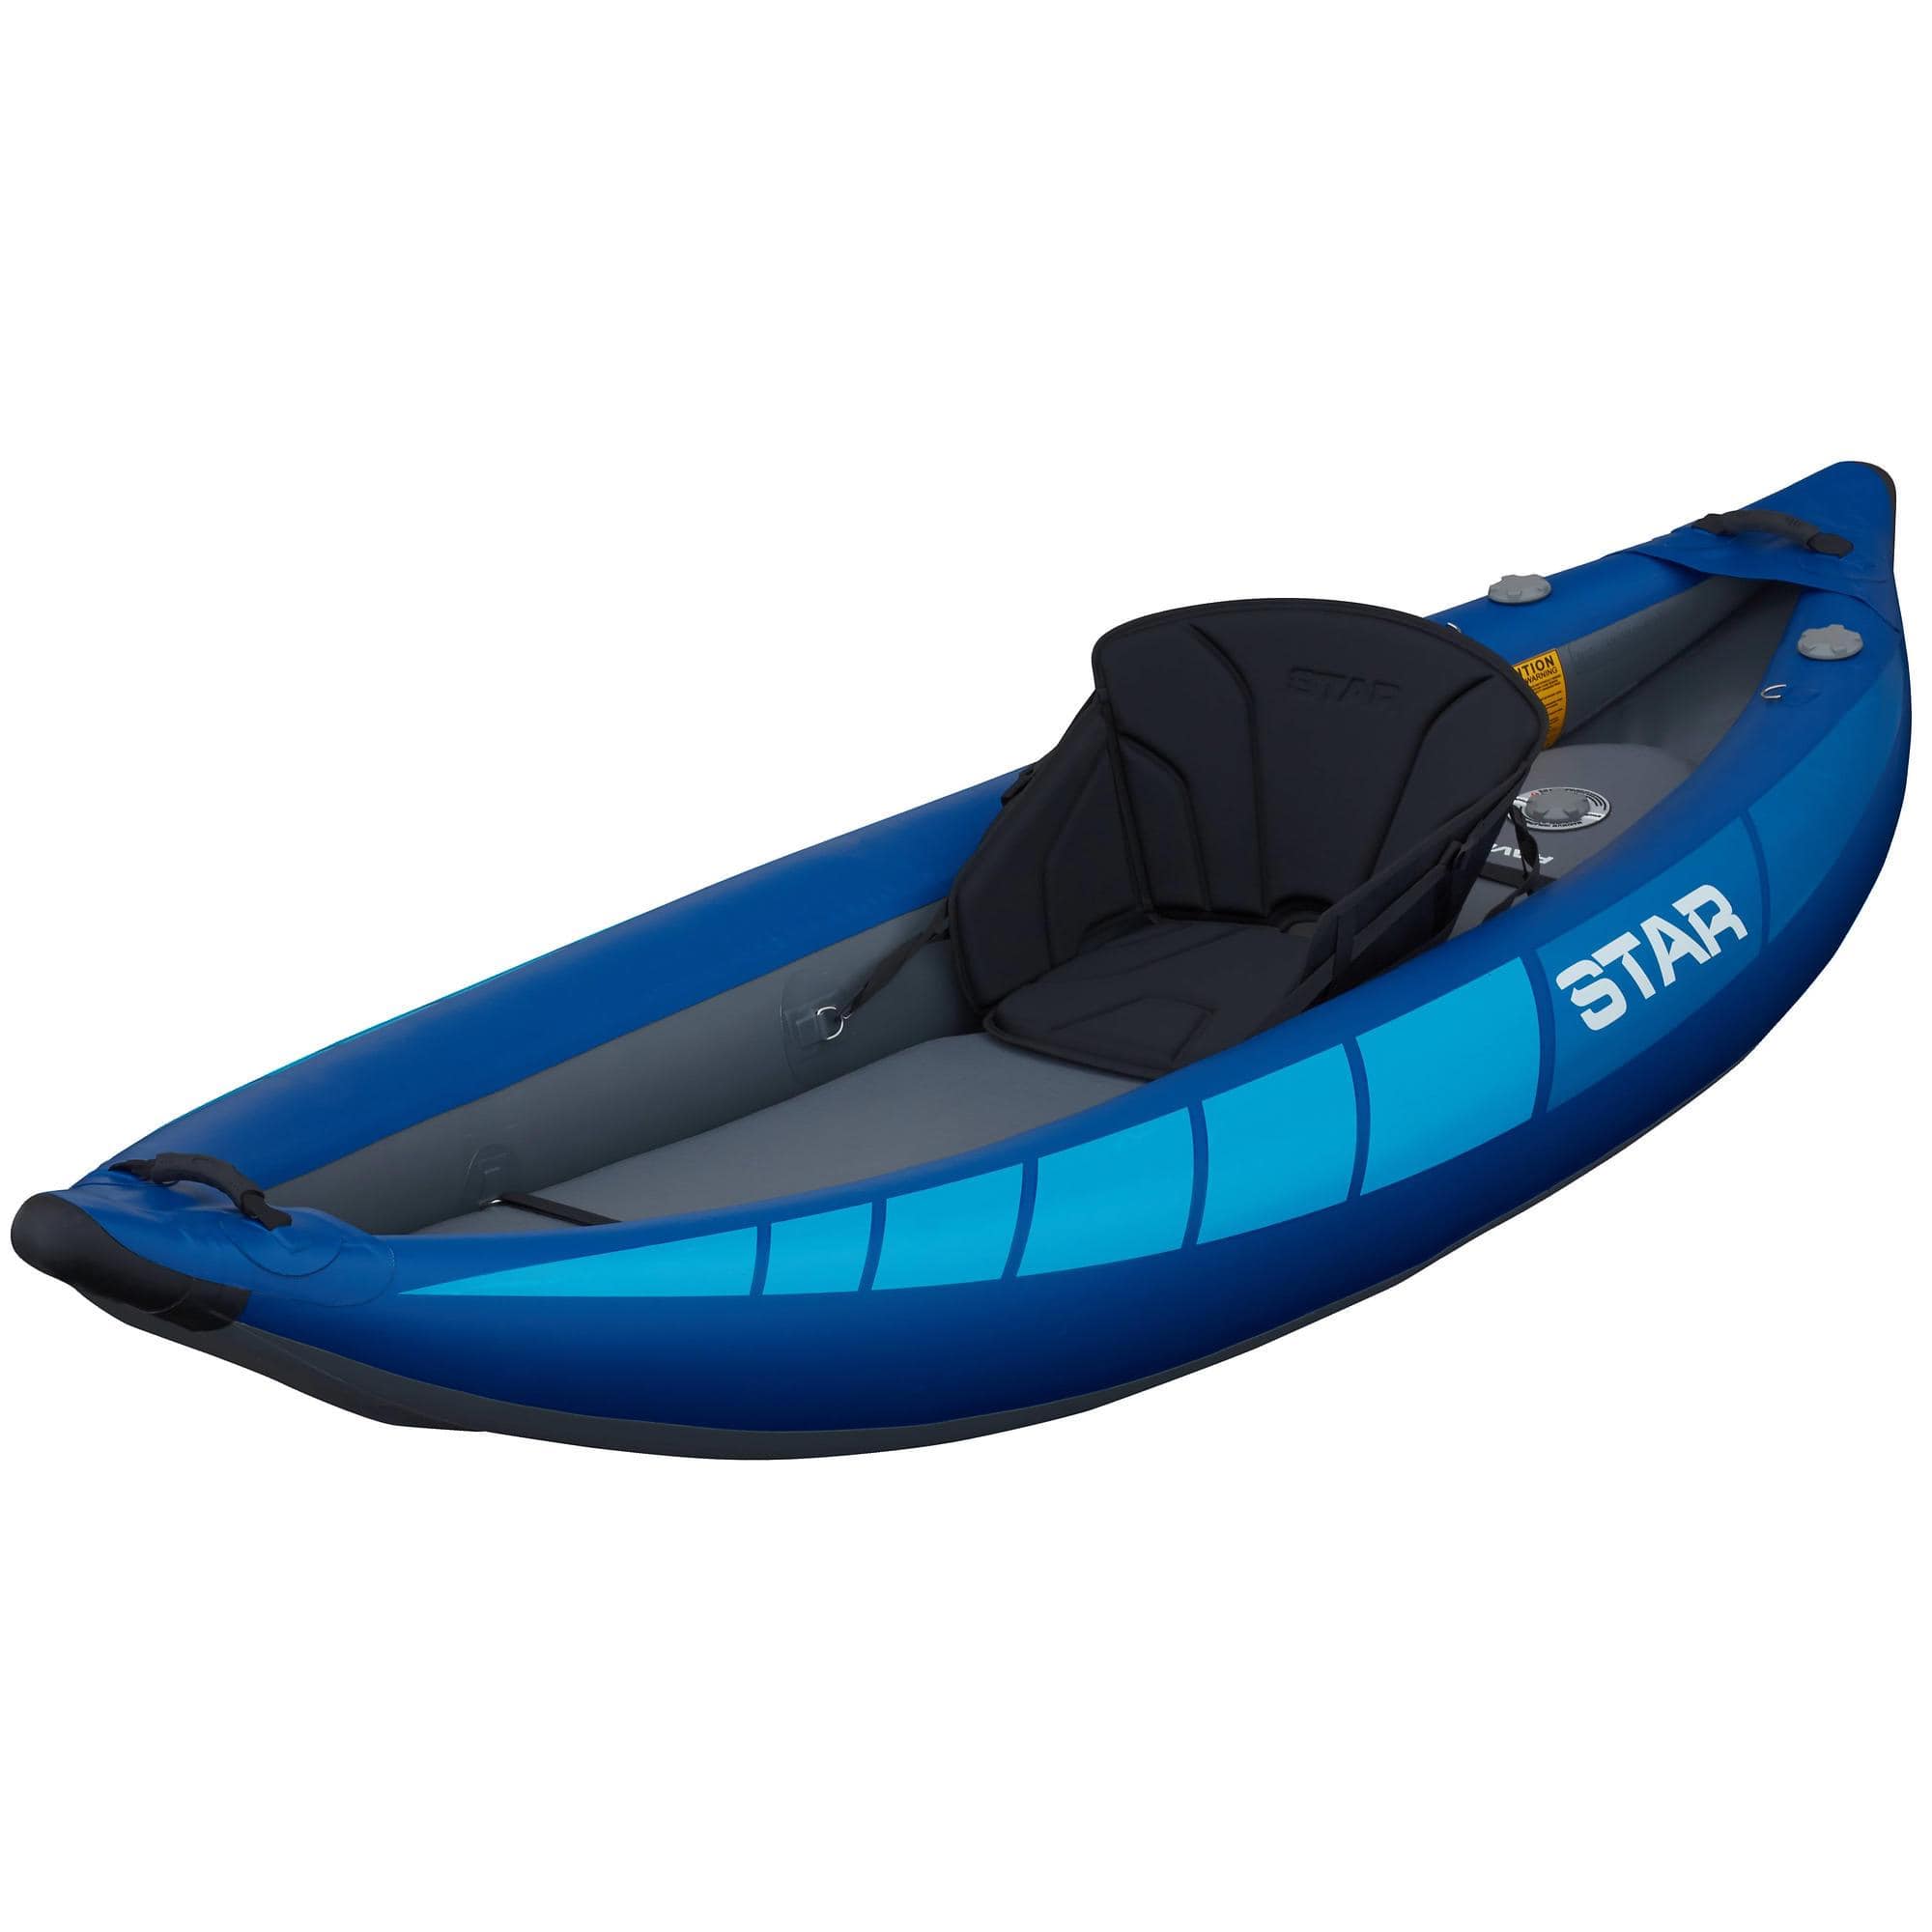 Are inflatable kayaks any good for Aussie conditions?